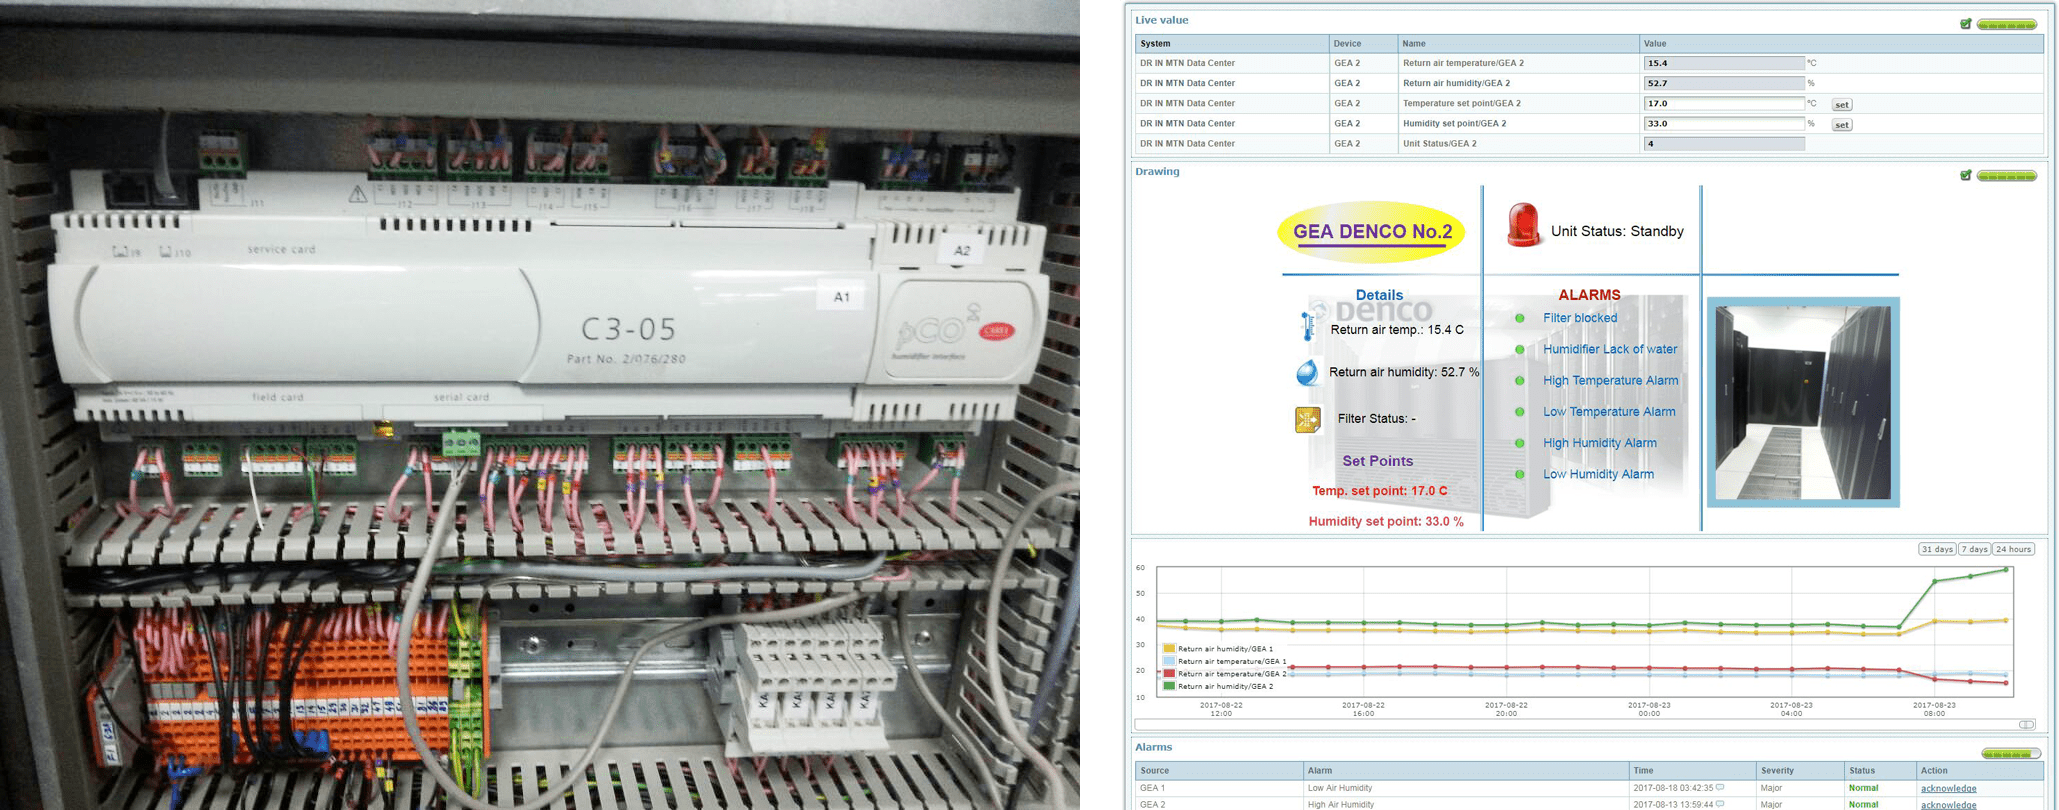 pC03 controller from Carel controls the operation of the AC units and is connected to a Netbiter gateway.